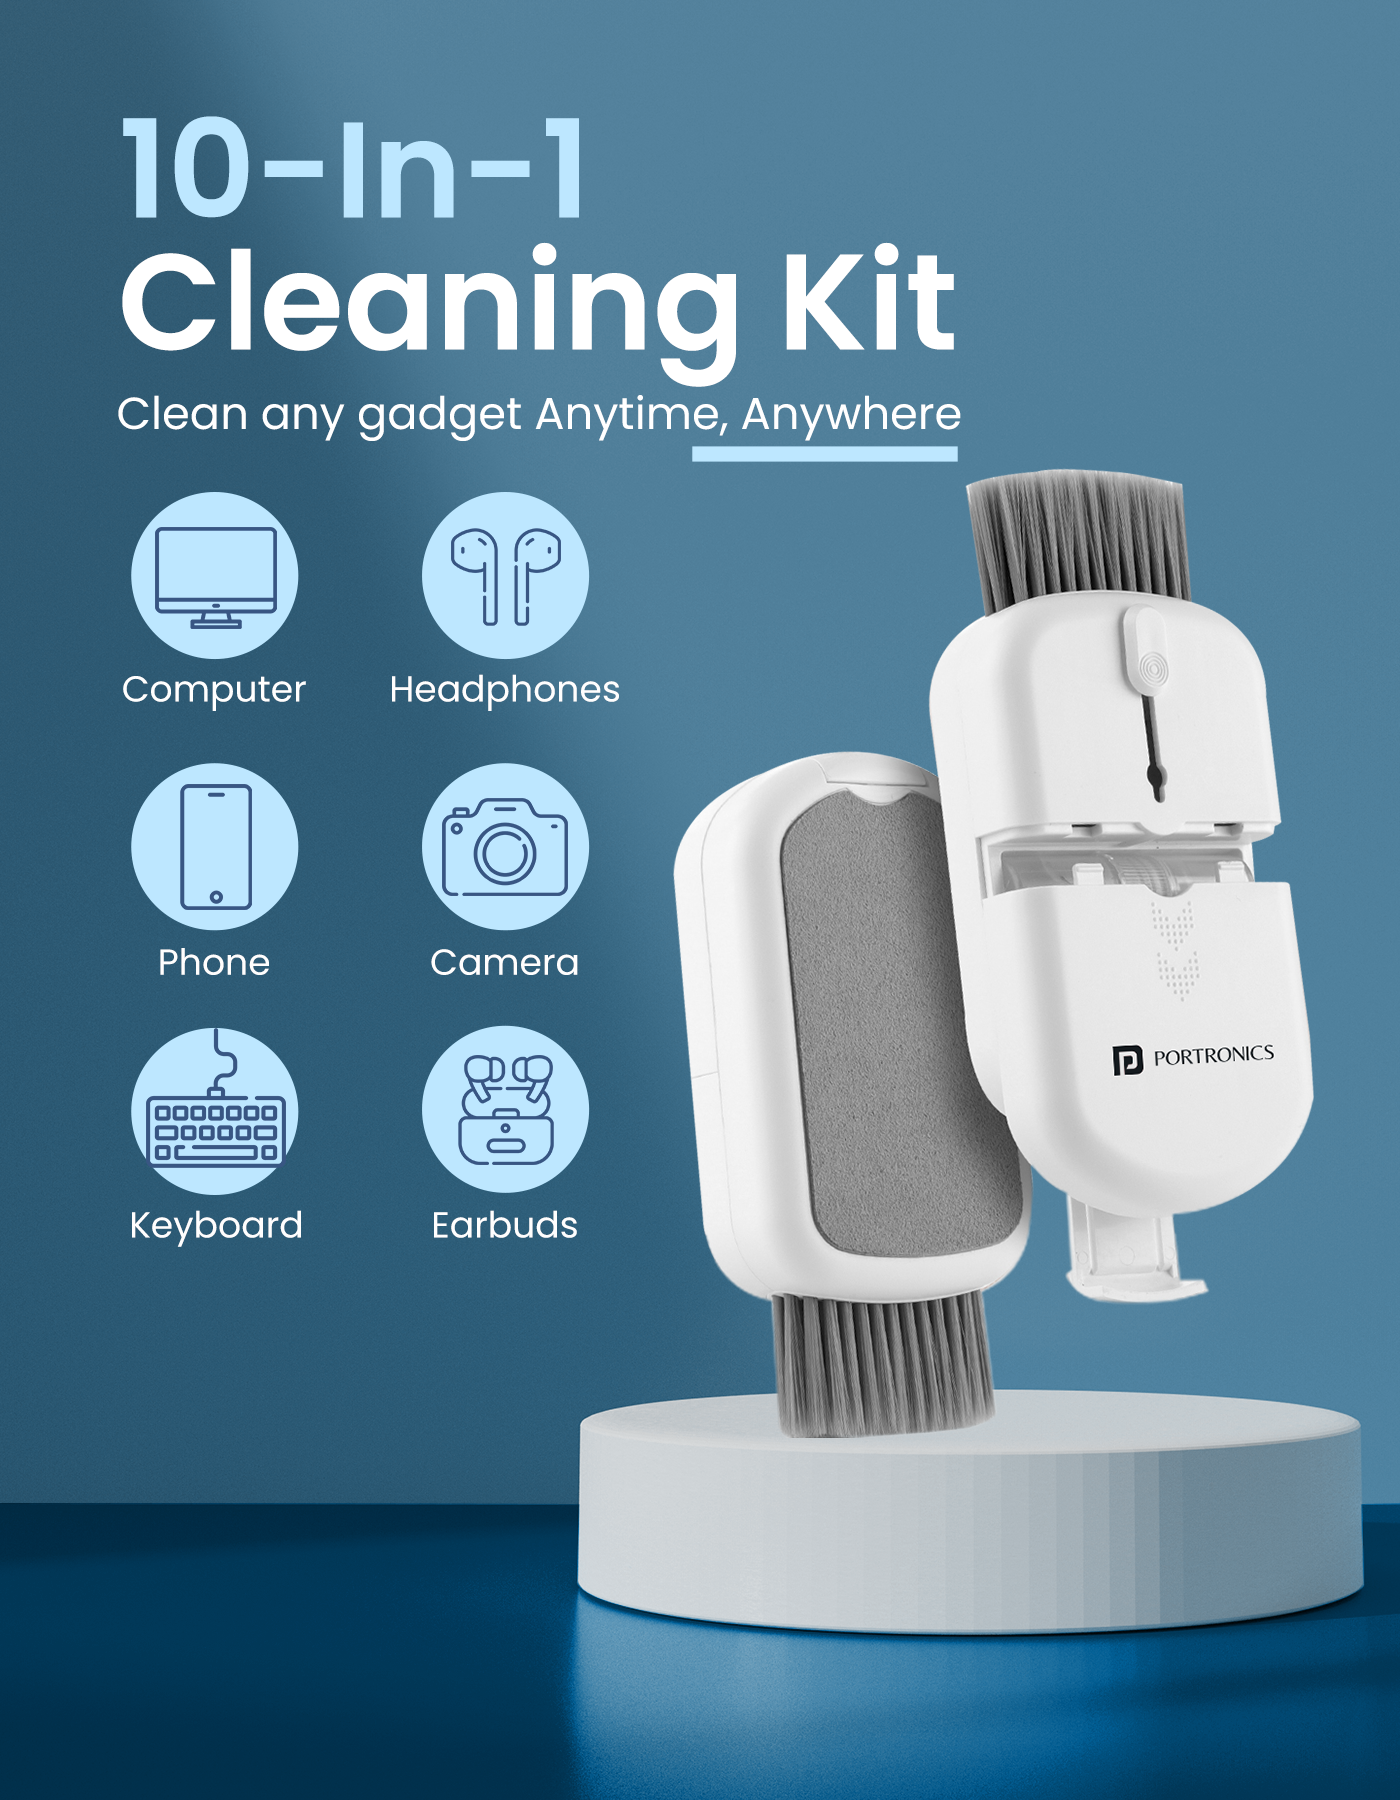 Portronics clean P 10 in 1 smart cleaner kit